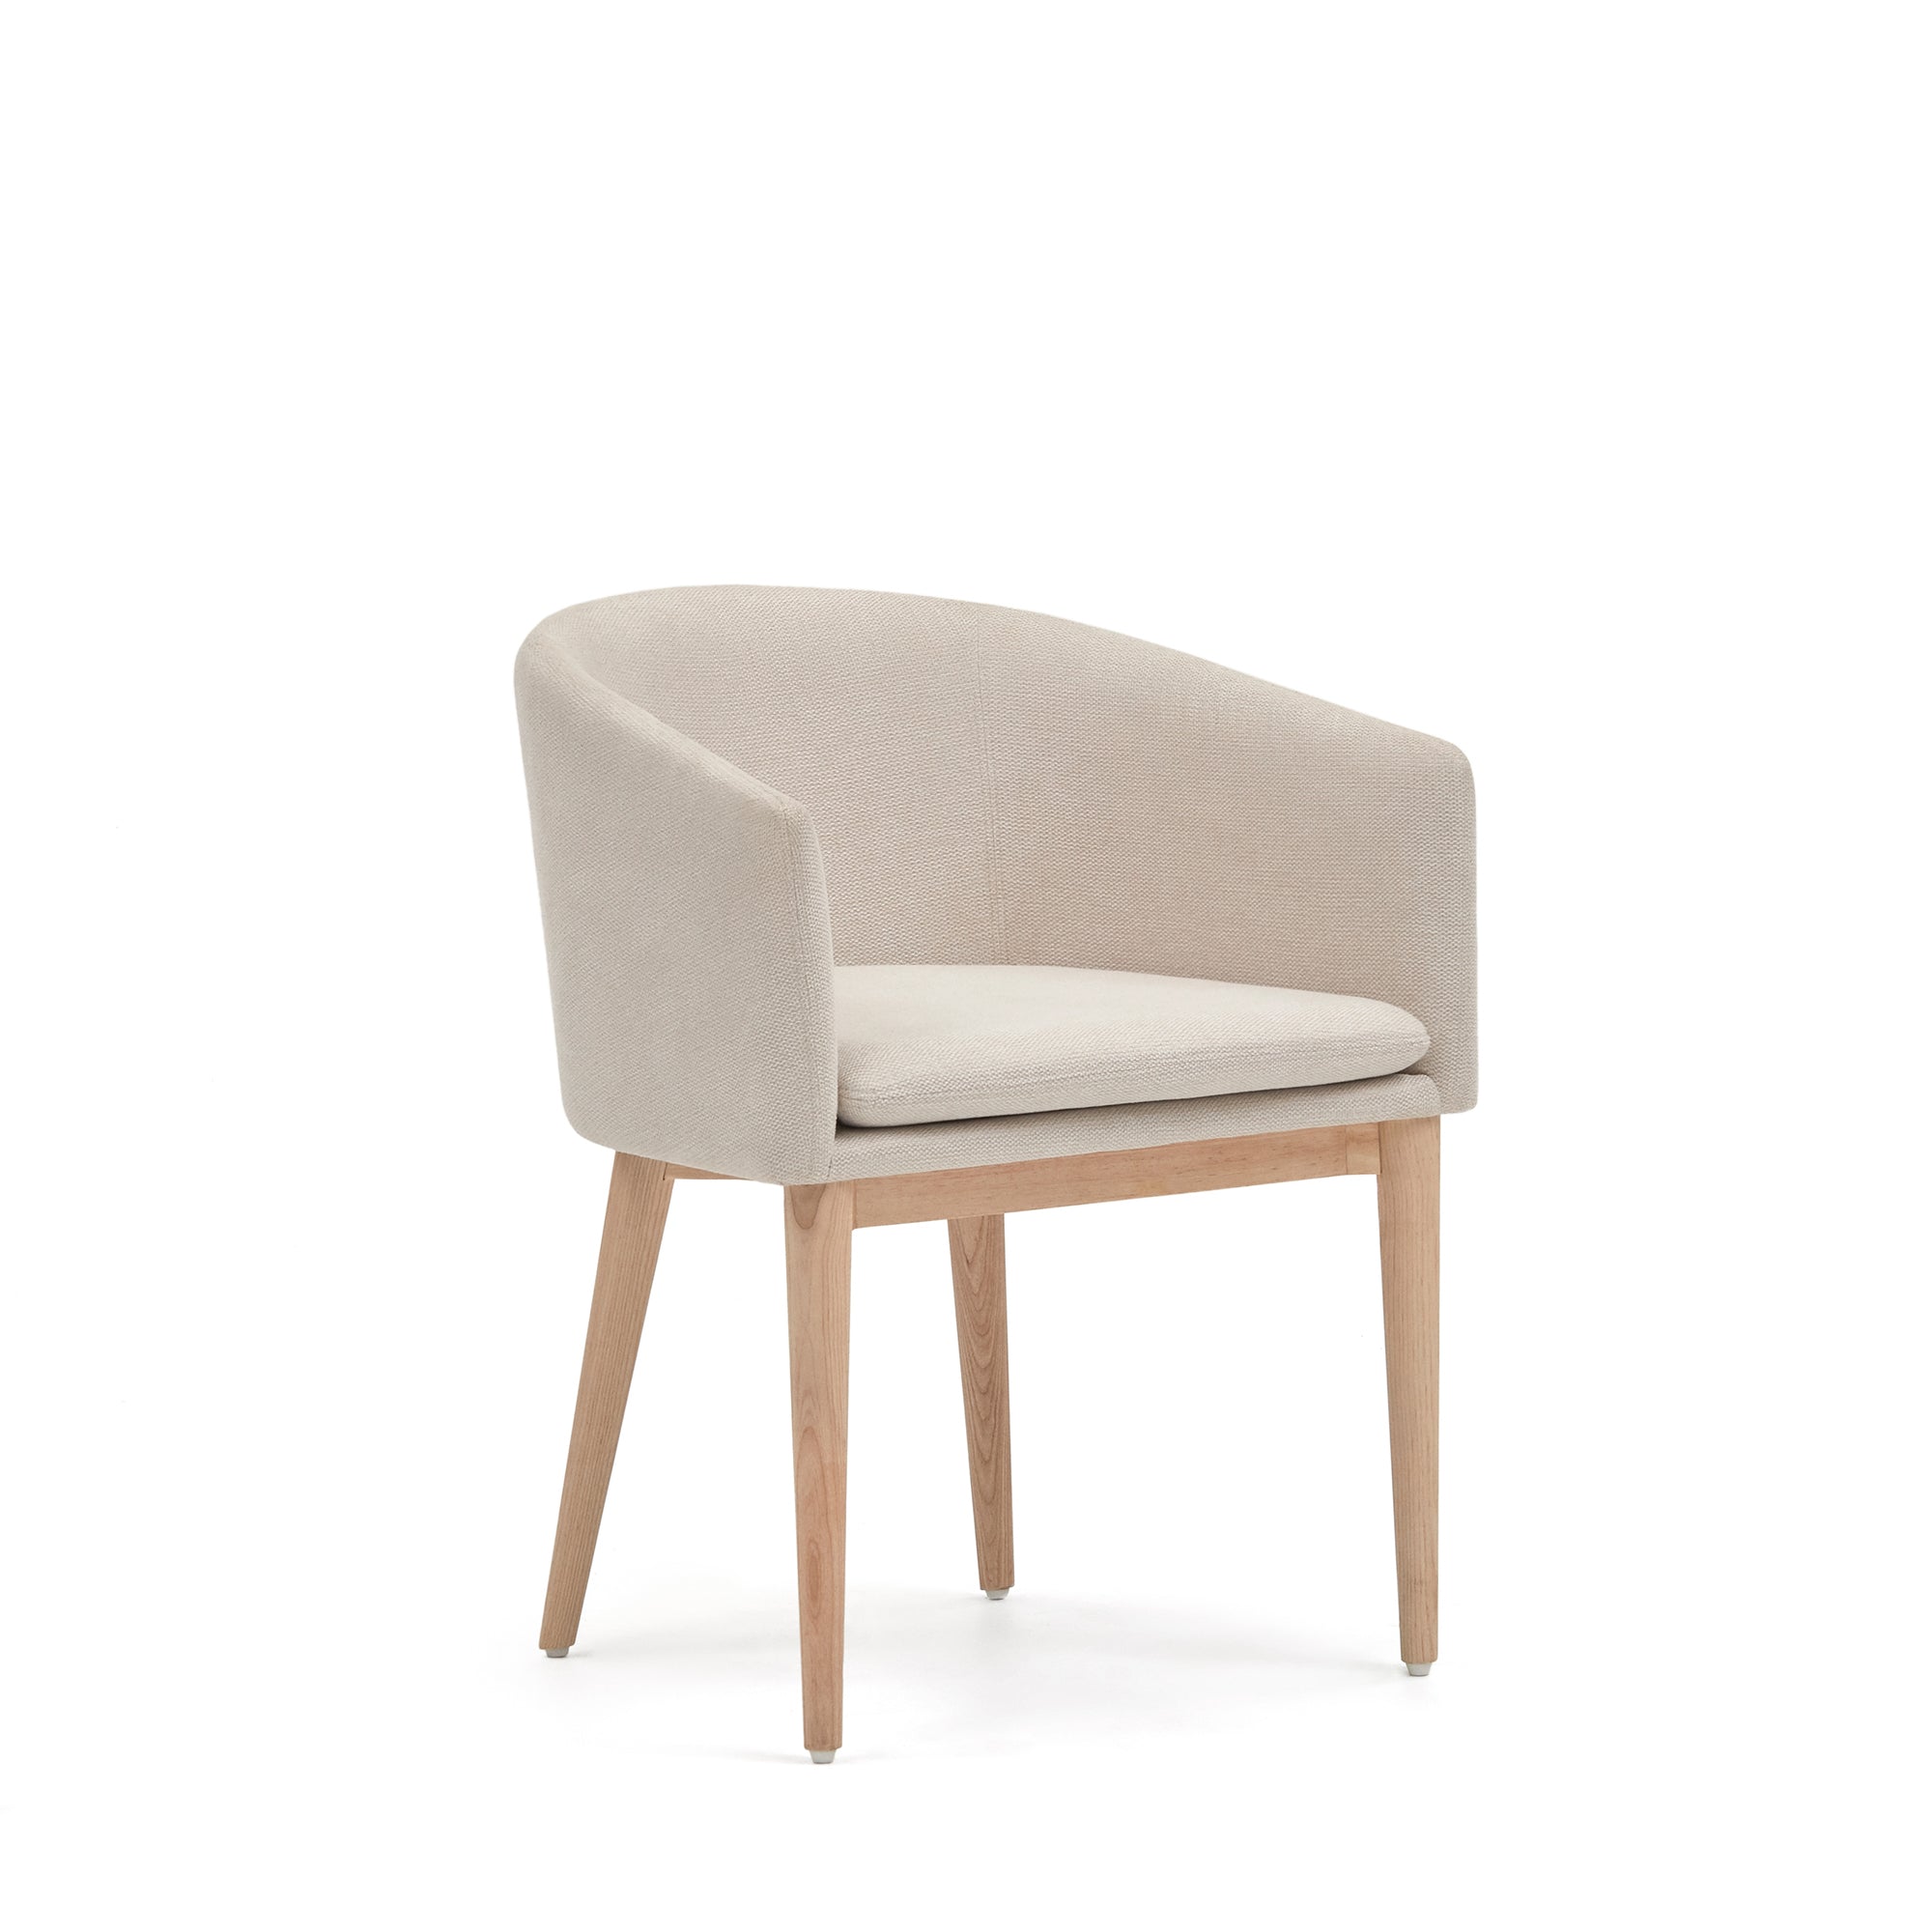 Harlan beige chenille chair with solid ash wood legs